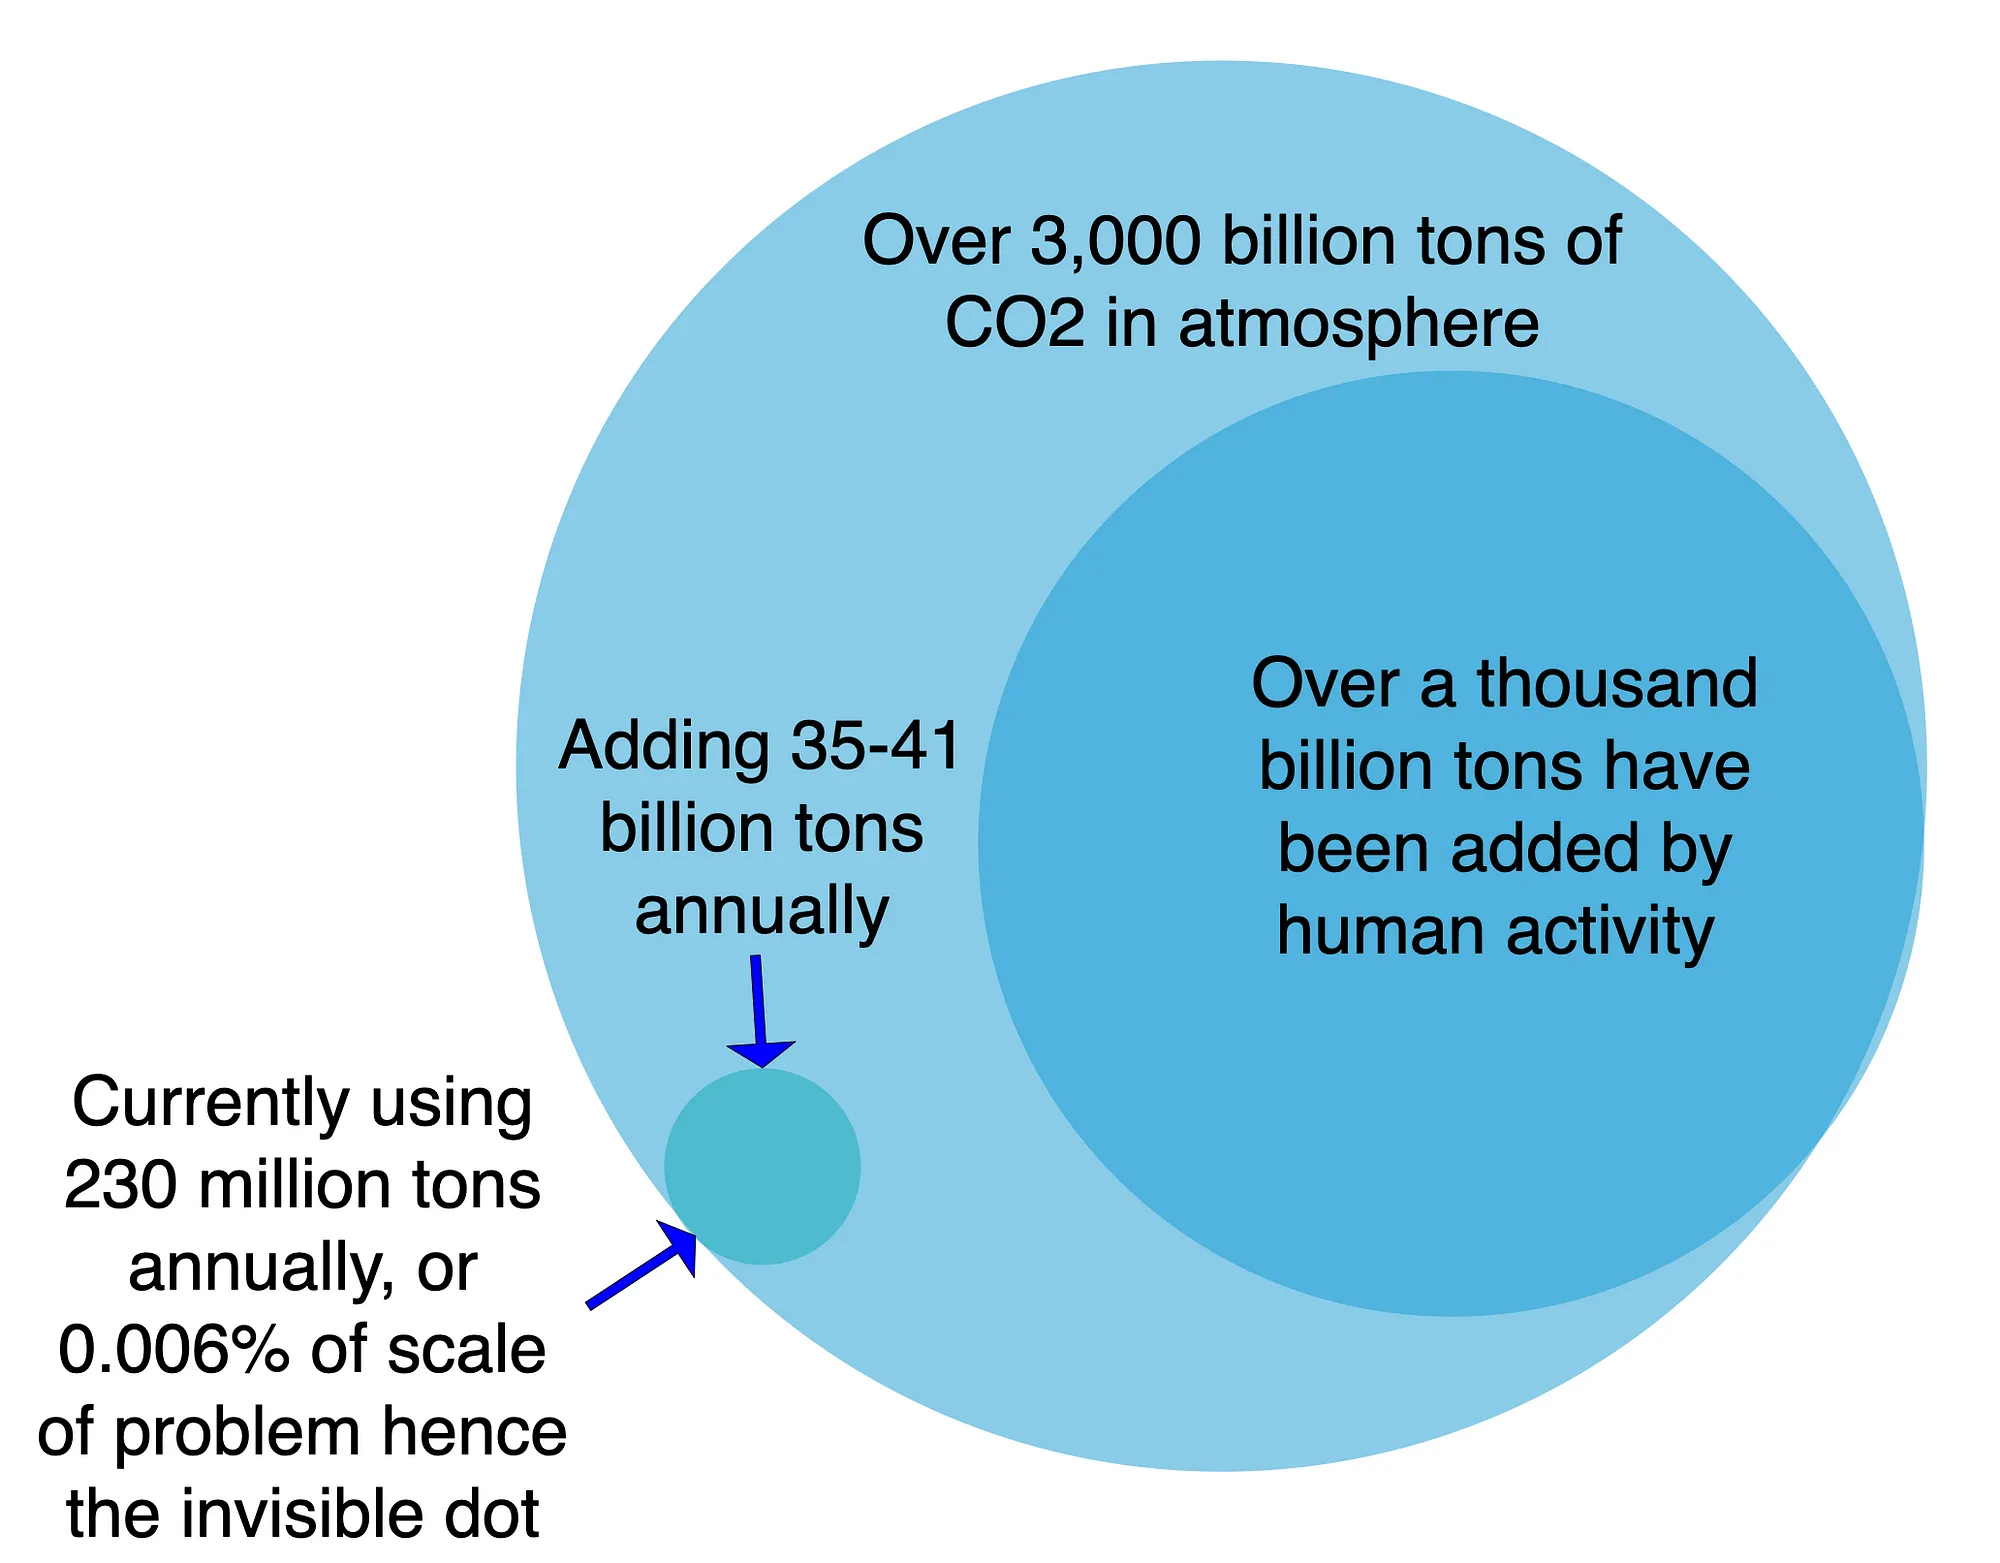 Excess CO2 annually and historically compared to global CO2 market